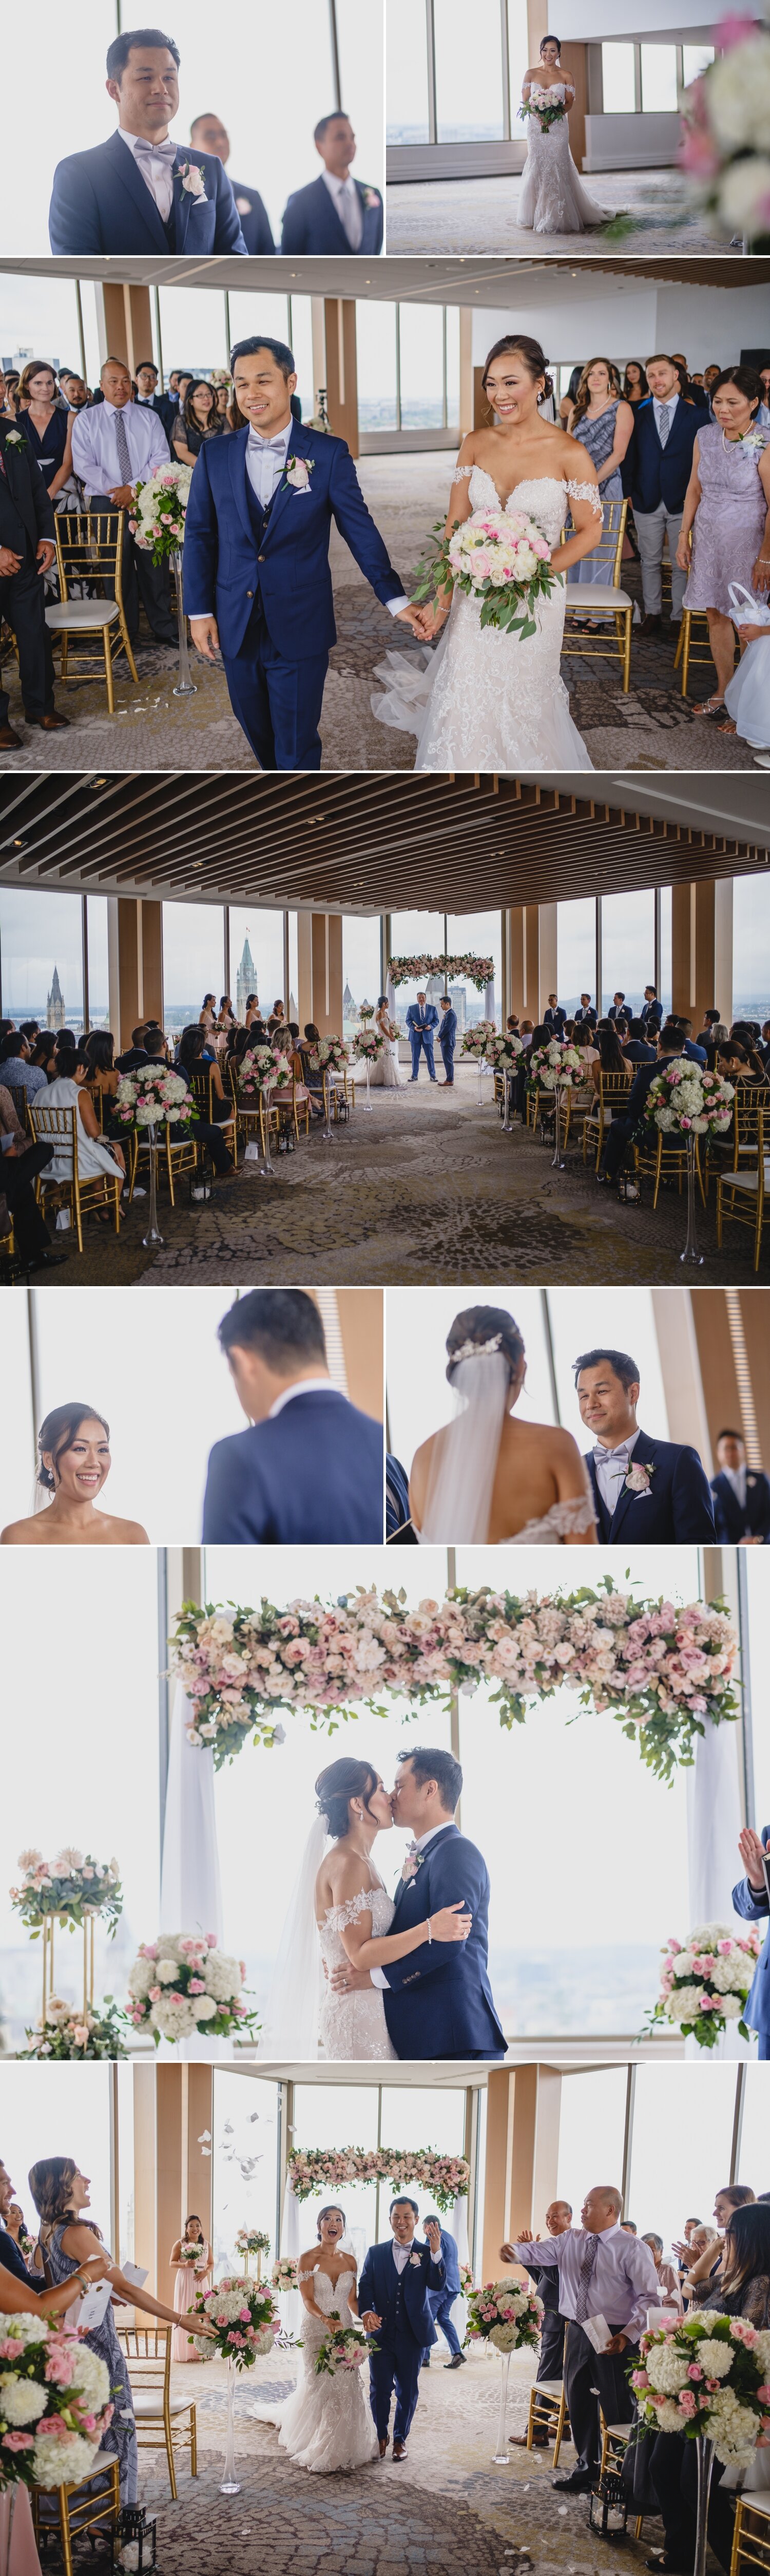 candid moments of bride and groom during their venue twenty two wedding ceremony at the westin ottawa ontario